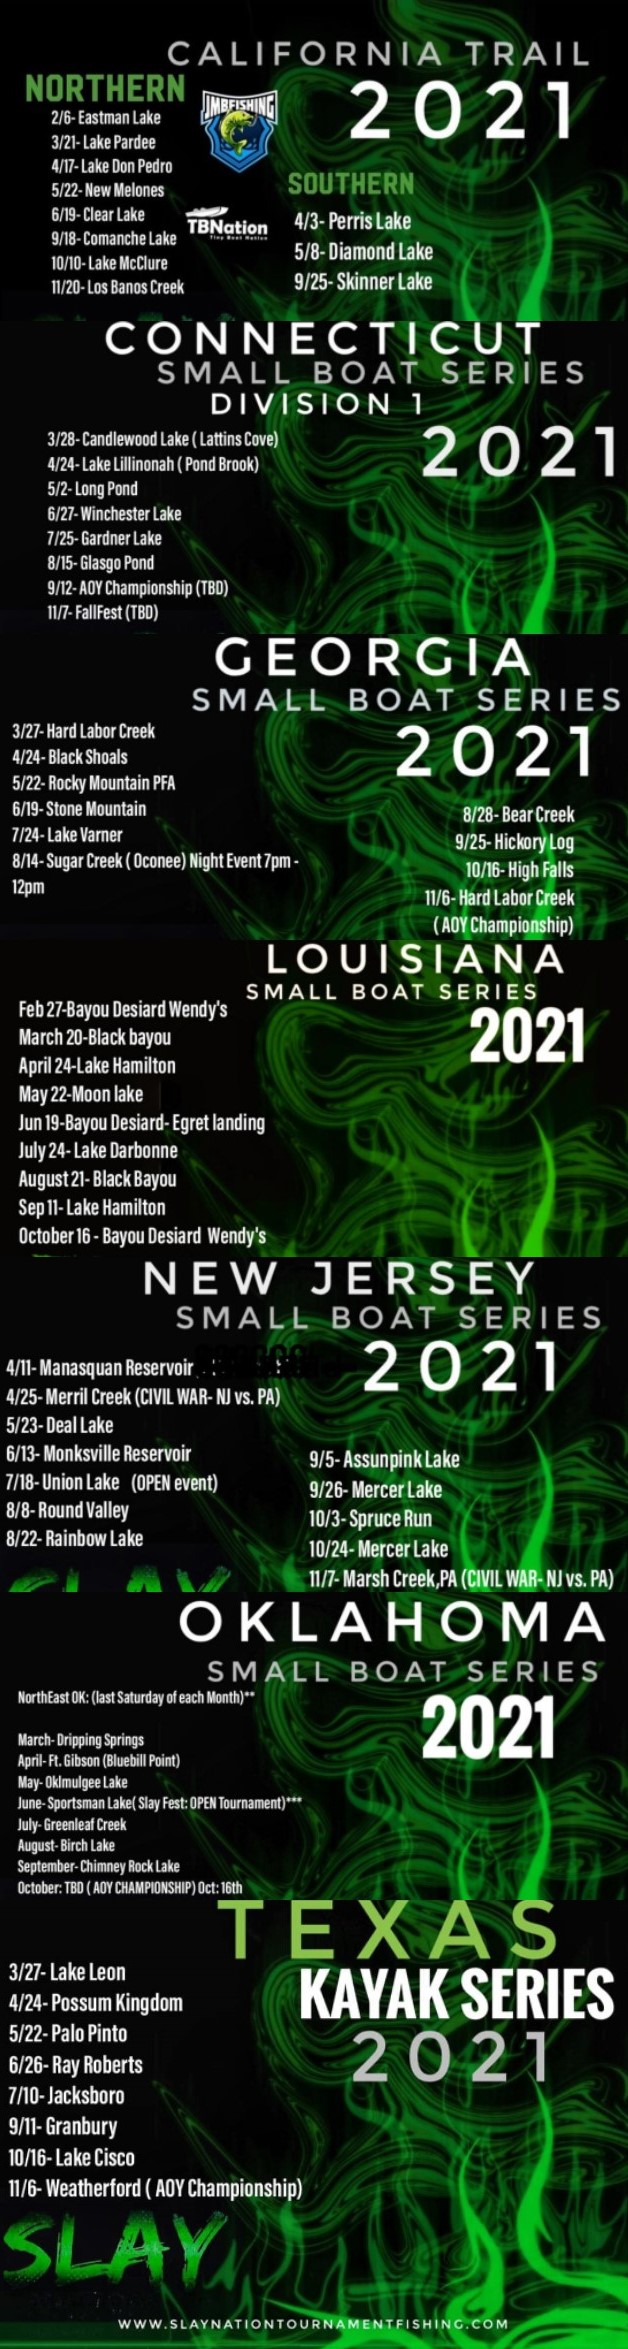 The 2021 schedule for SNTS